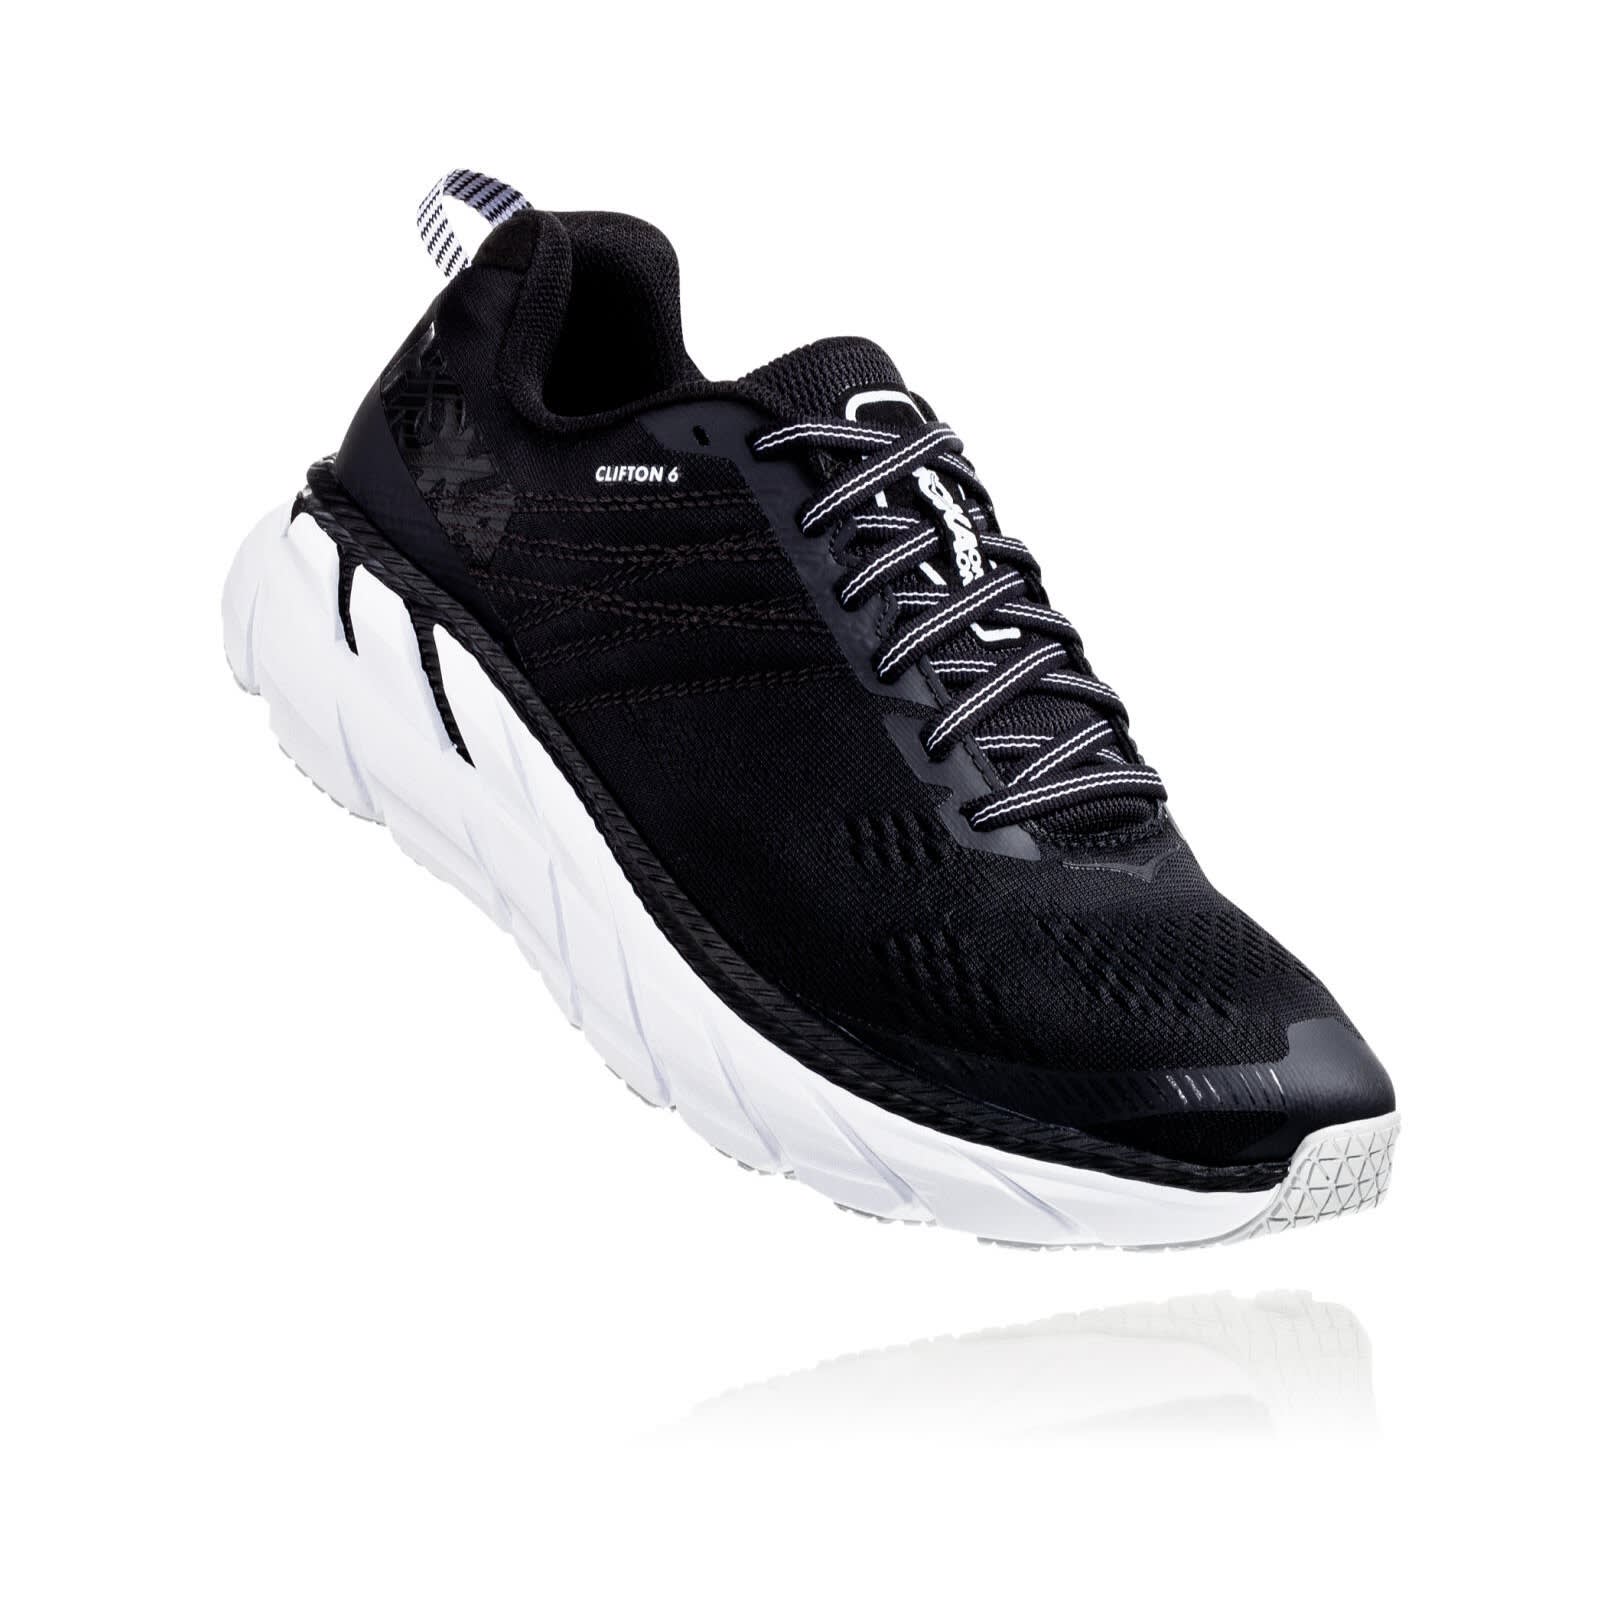 Buy Hoka One One Men's Clifton 6 from Outnorth